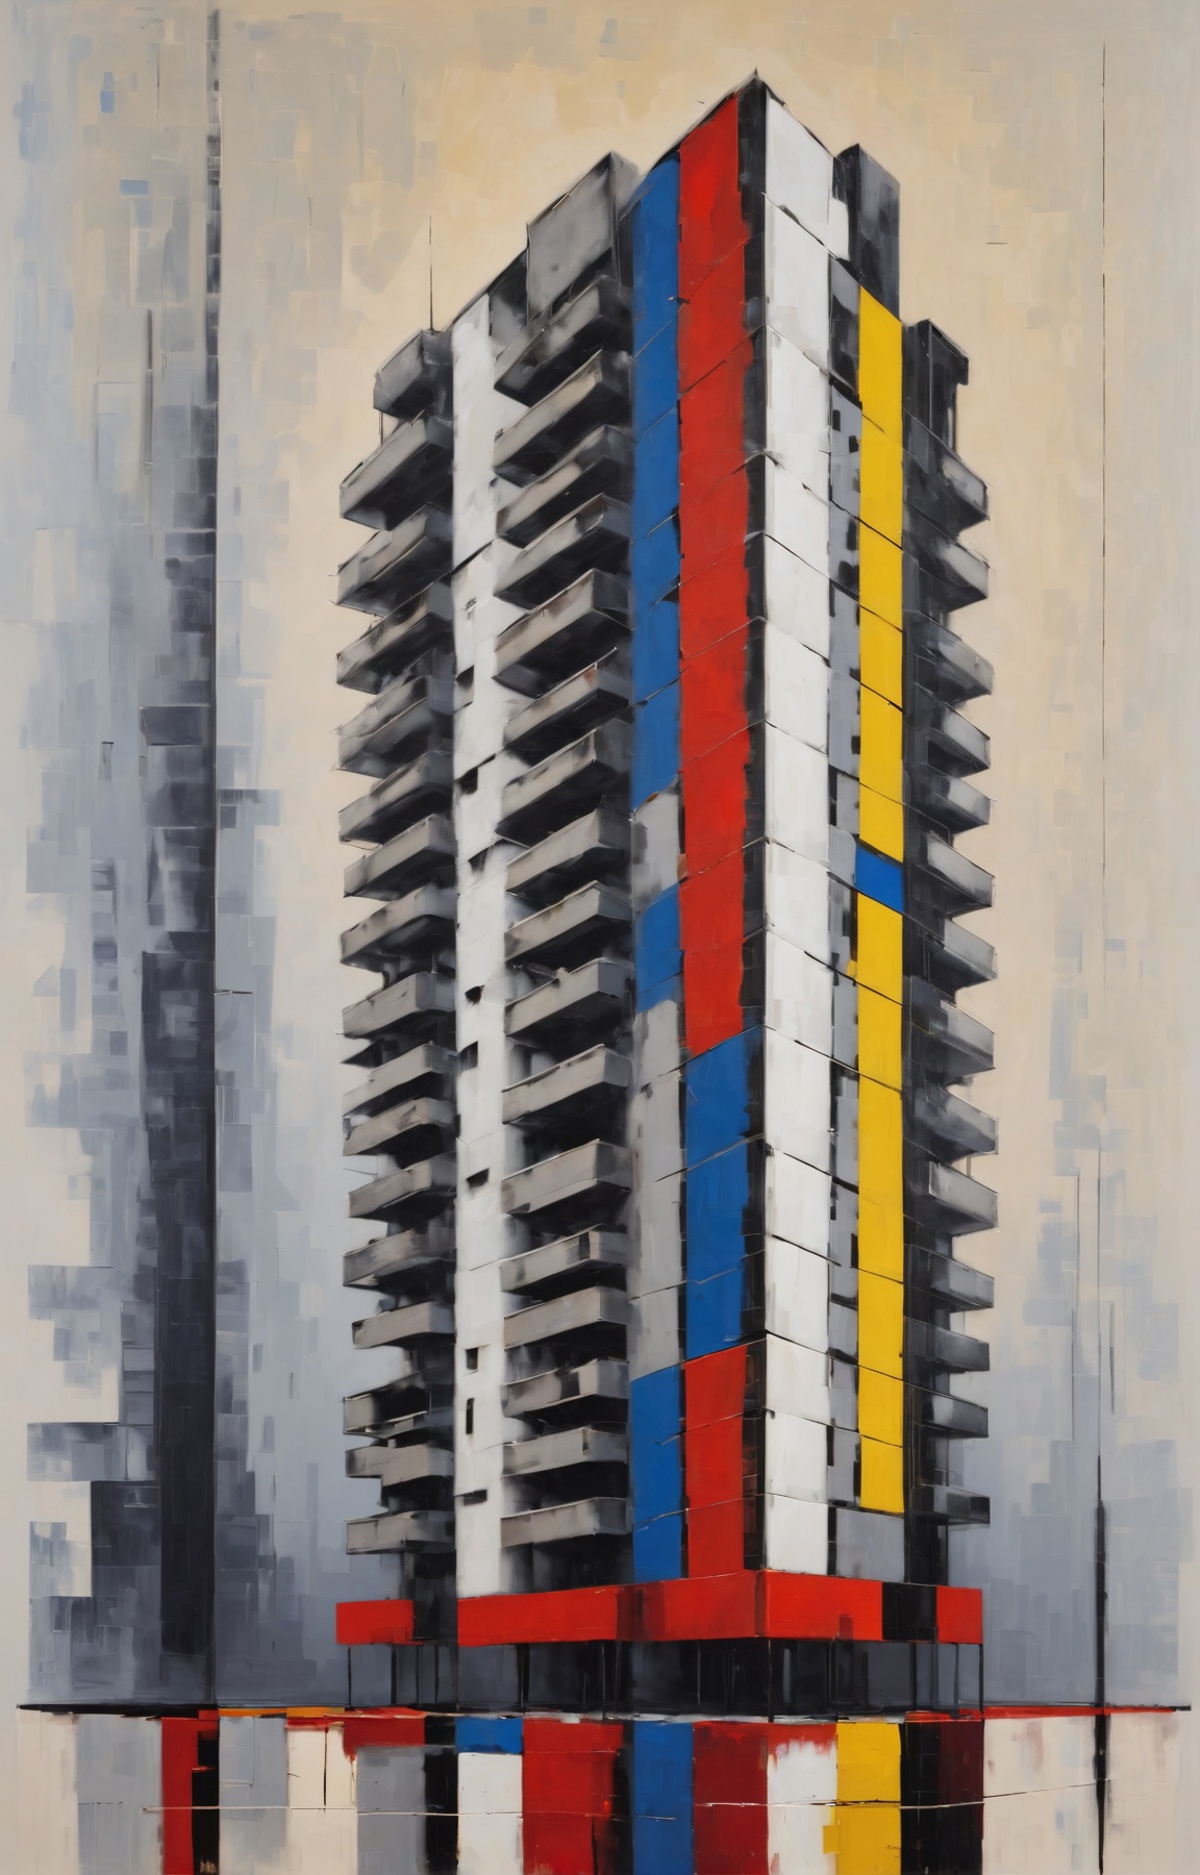 A painting of a tall, colorful building with windows.